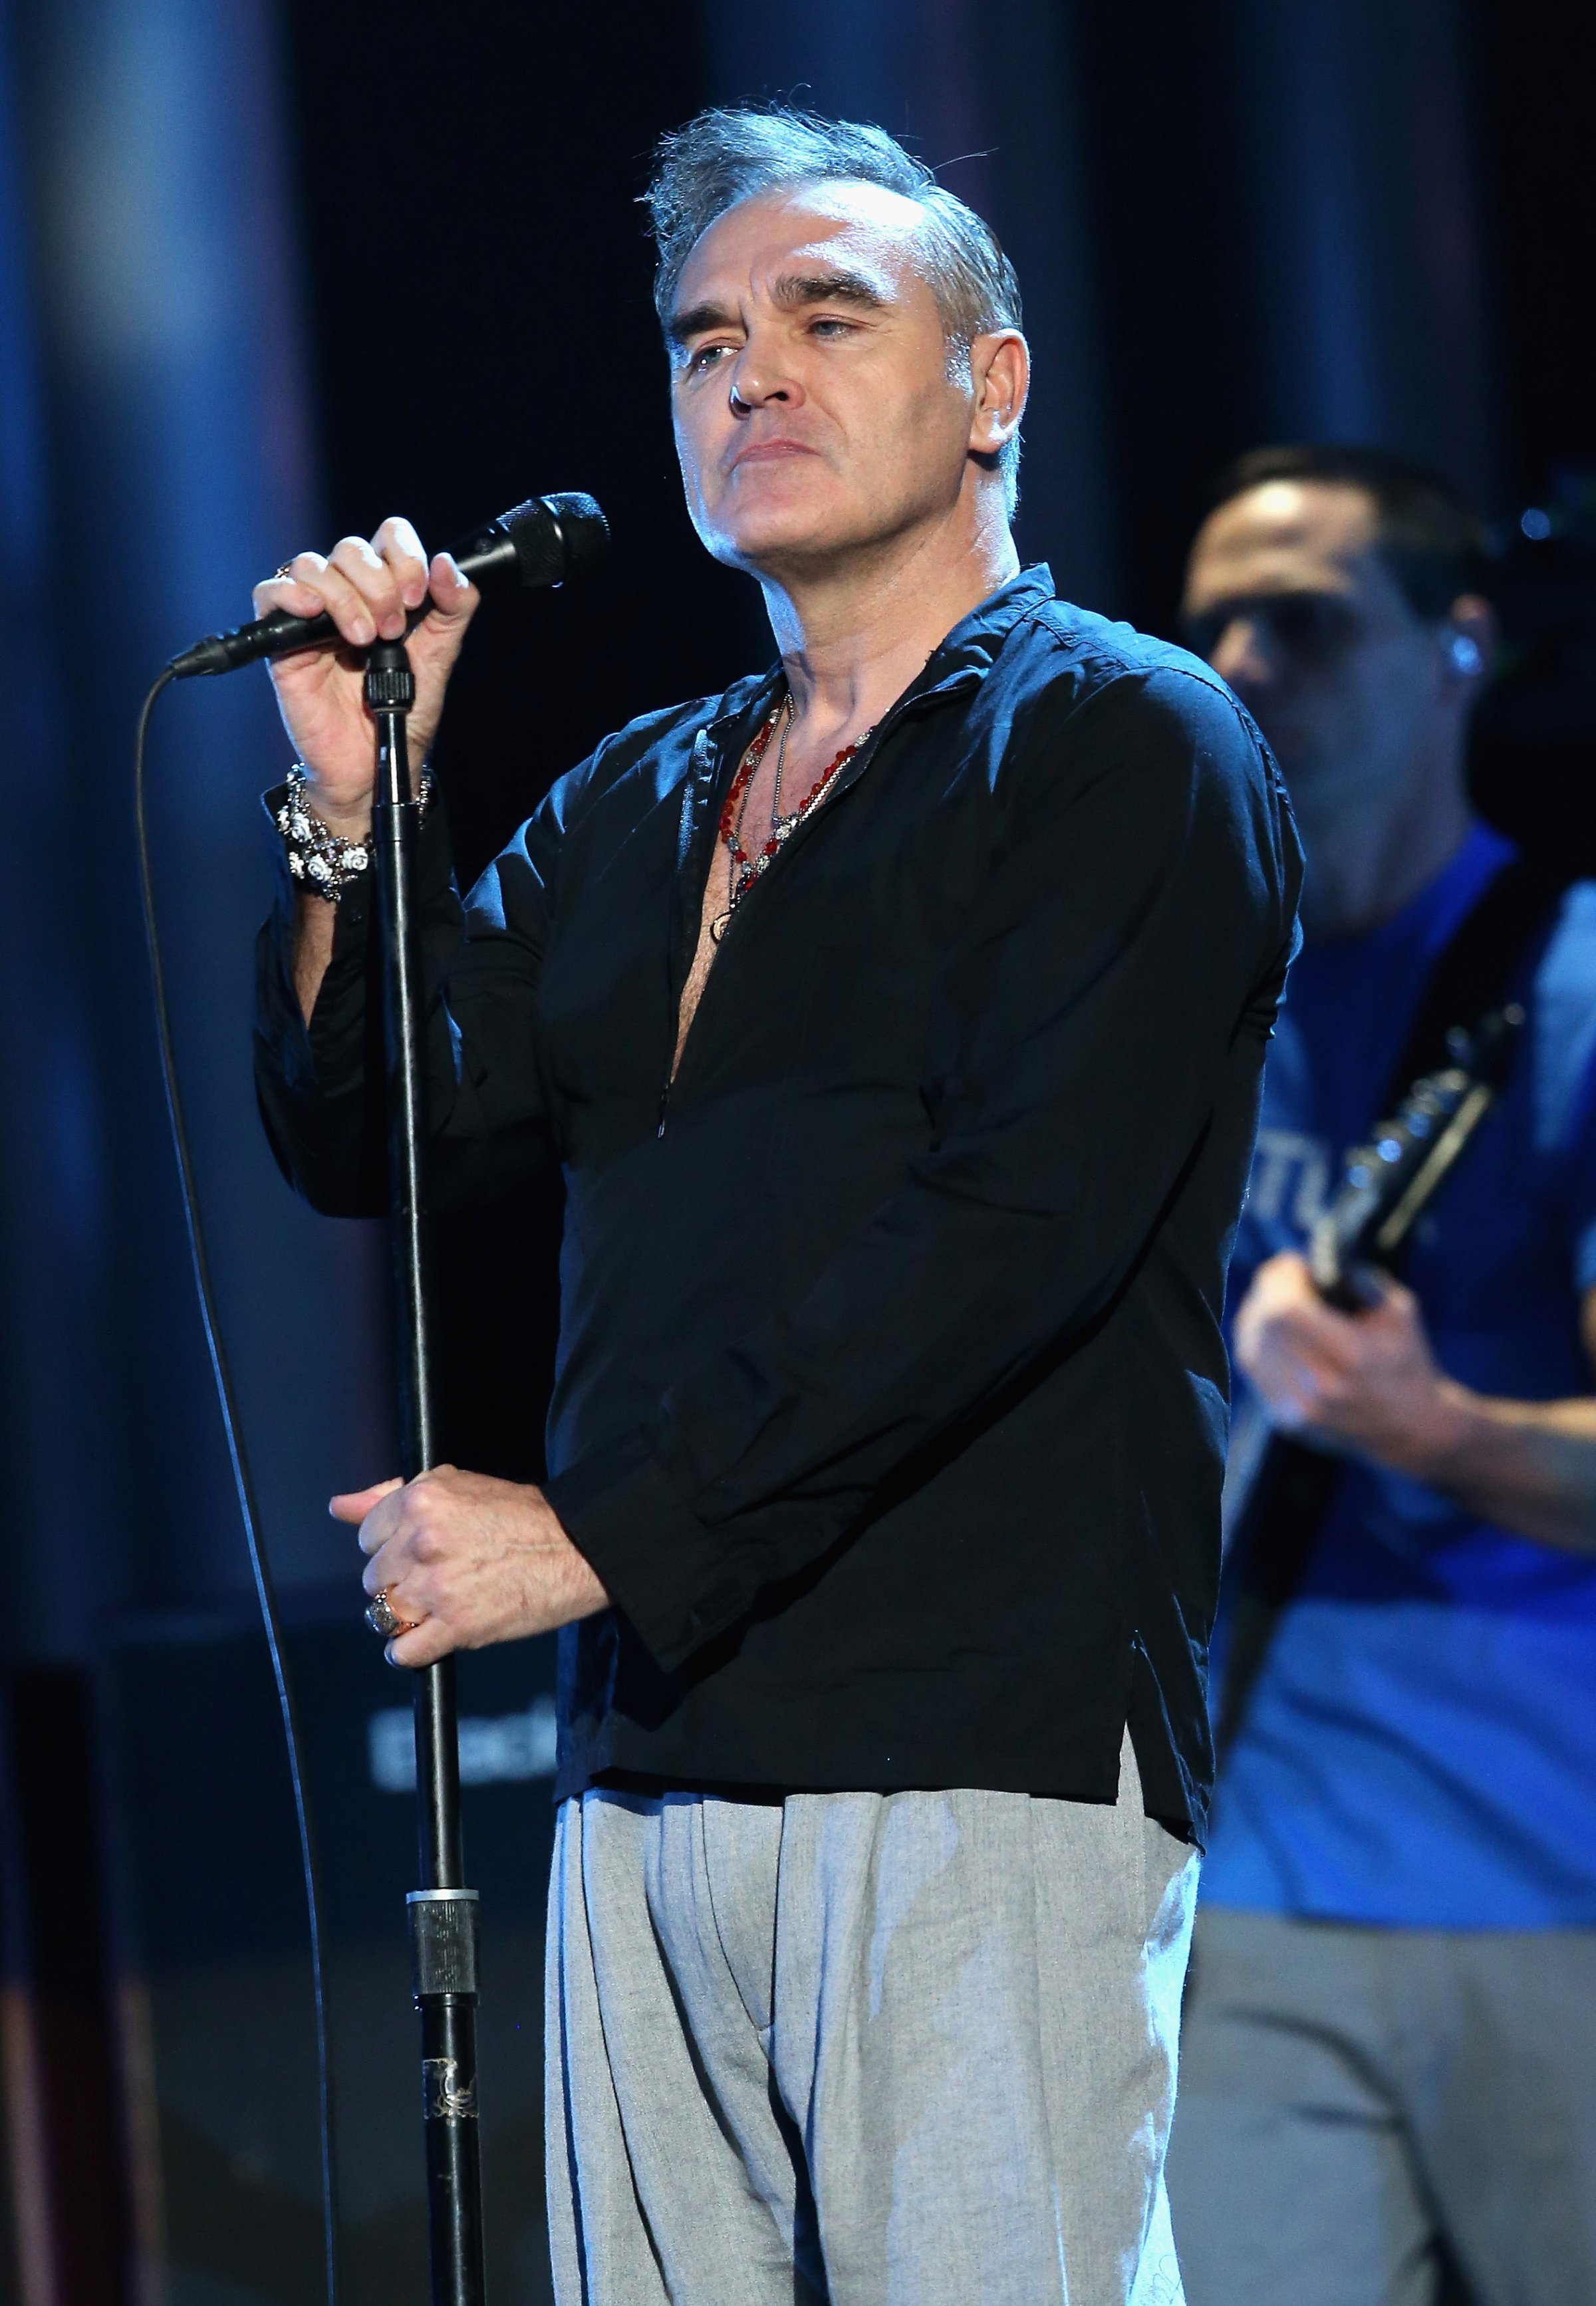 Singer Morrissey performs on stage during the 20th annual Nobel Peace Prize Concert at the Oslo Spektrum on Dec. 11, 2013 in Oslo.